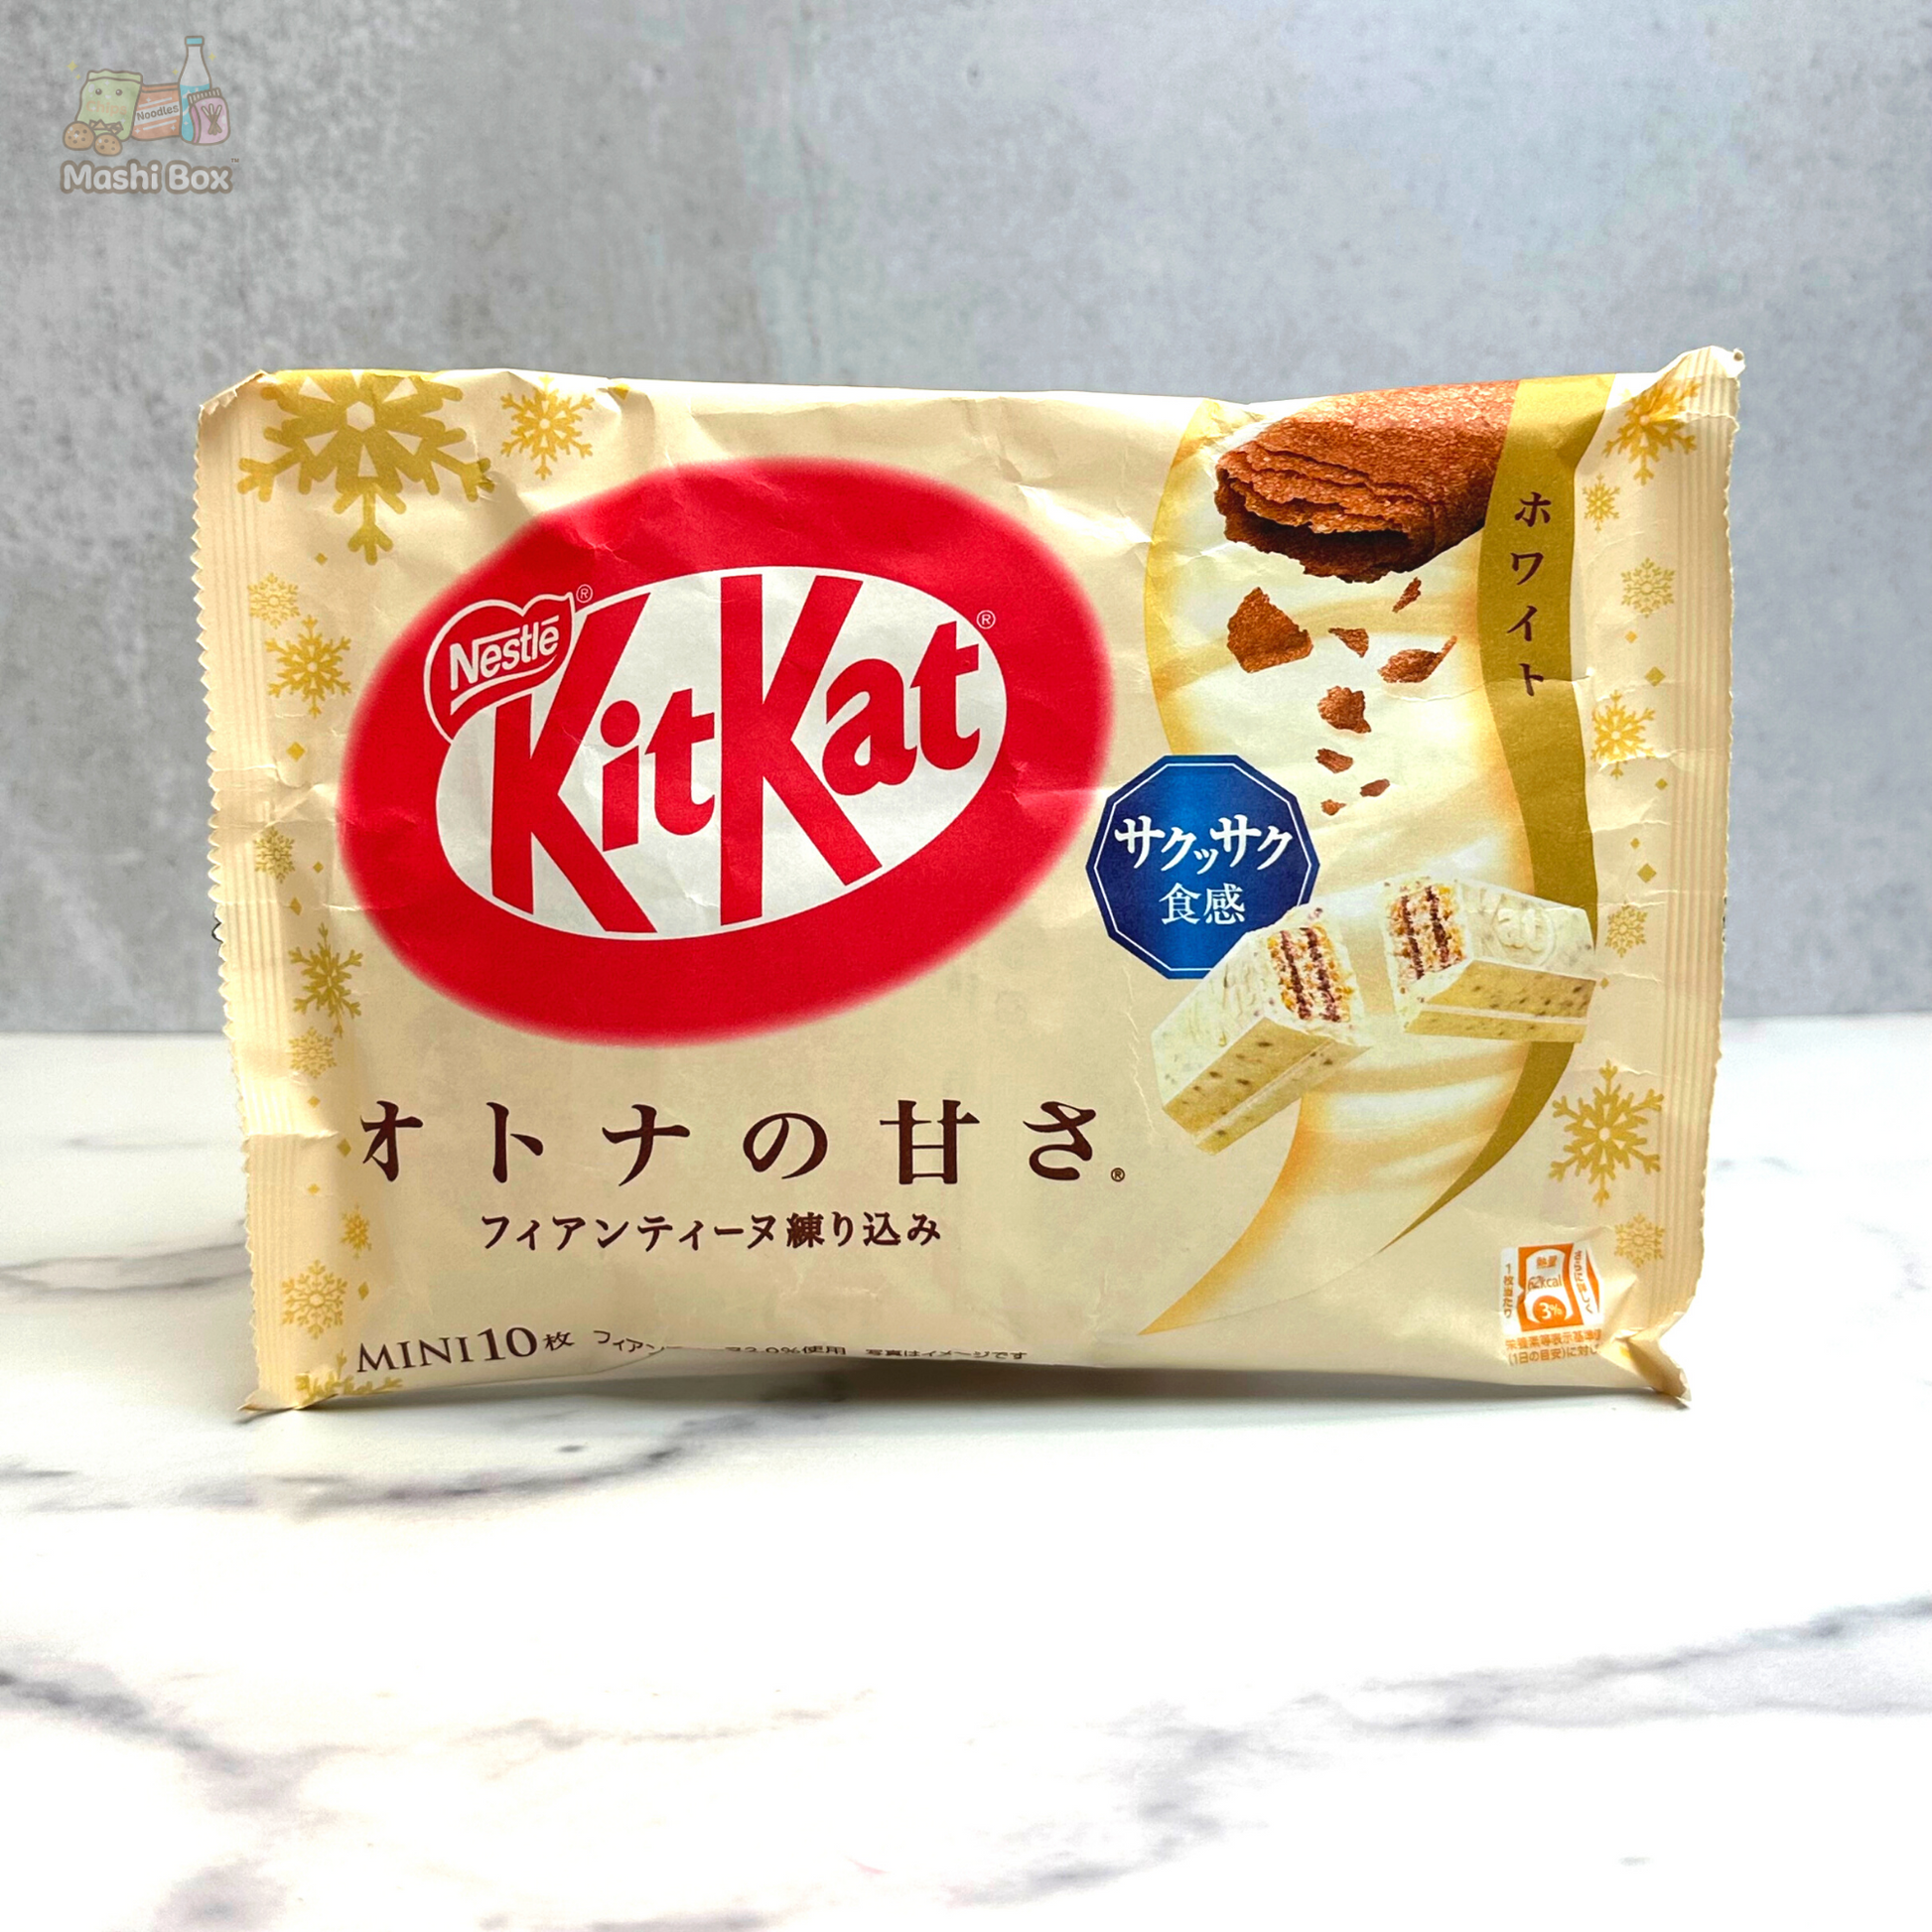 KitKat you can bake to launch in Japan